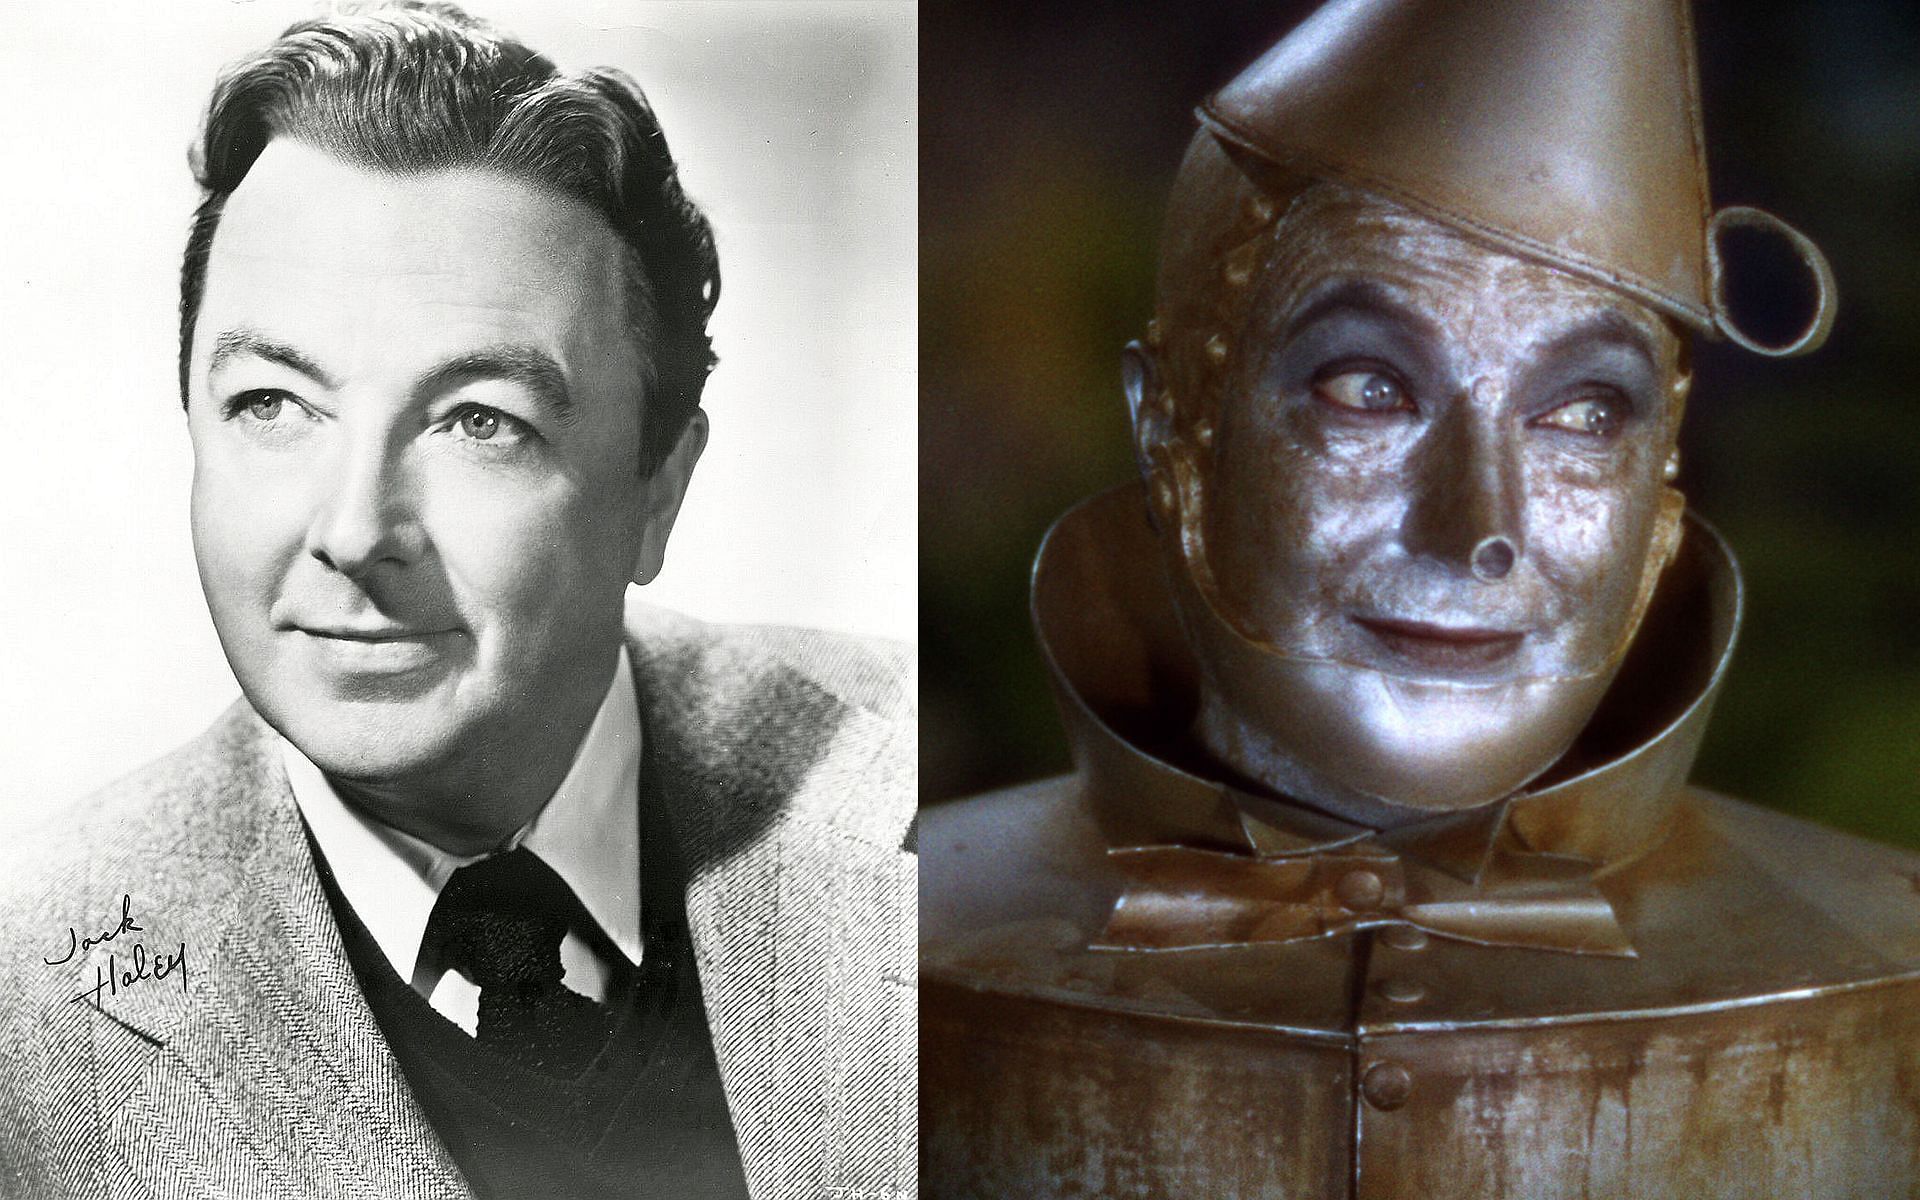 The Tin Man oil can from the Wizard of Oz is up for auction with bidding starting at $50,000 (Image via IMDb)